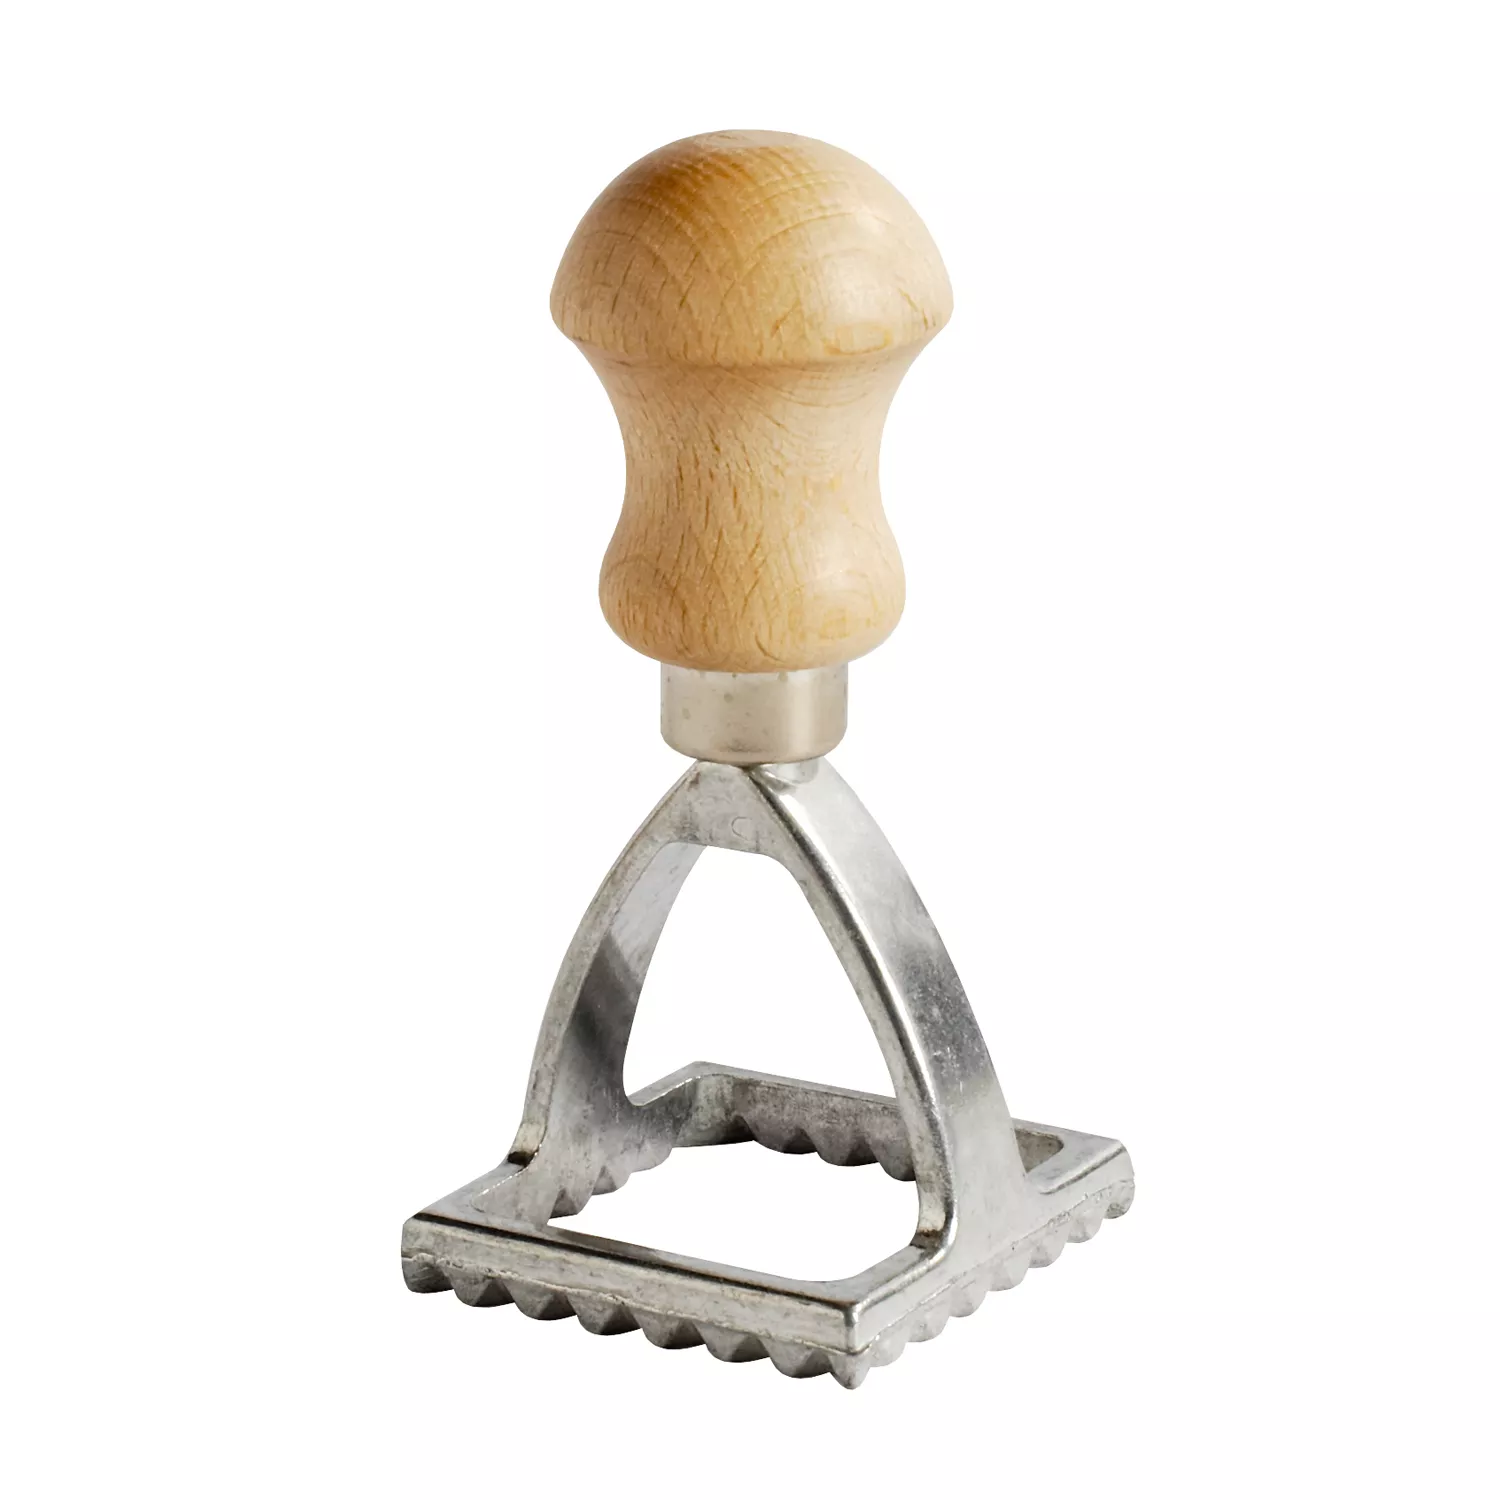 Eppicotispai Aluminum Square Ravioli Stamp with Beechwood Handle, 2-3/4 inch by 2-3/4 inch